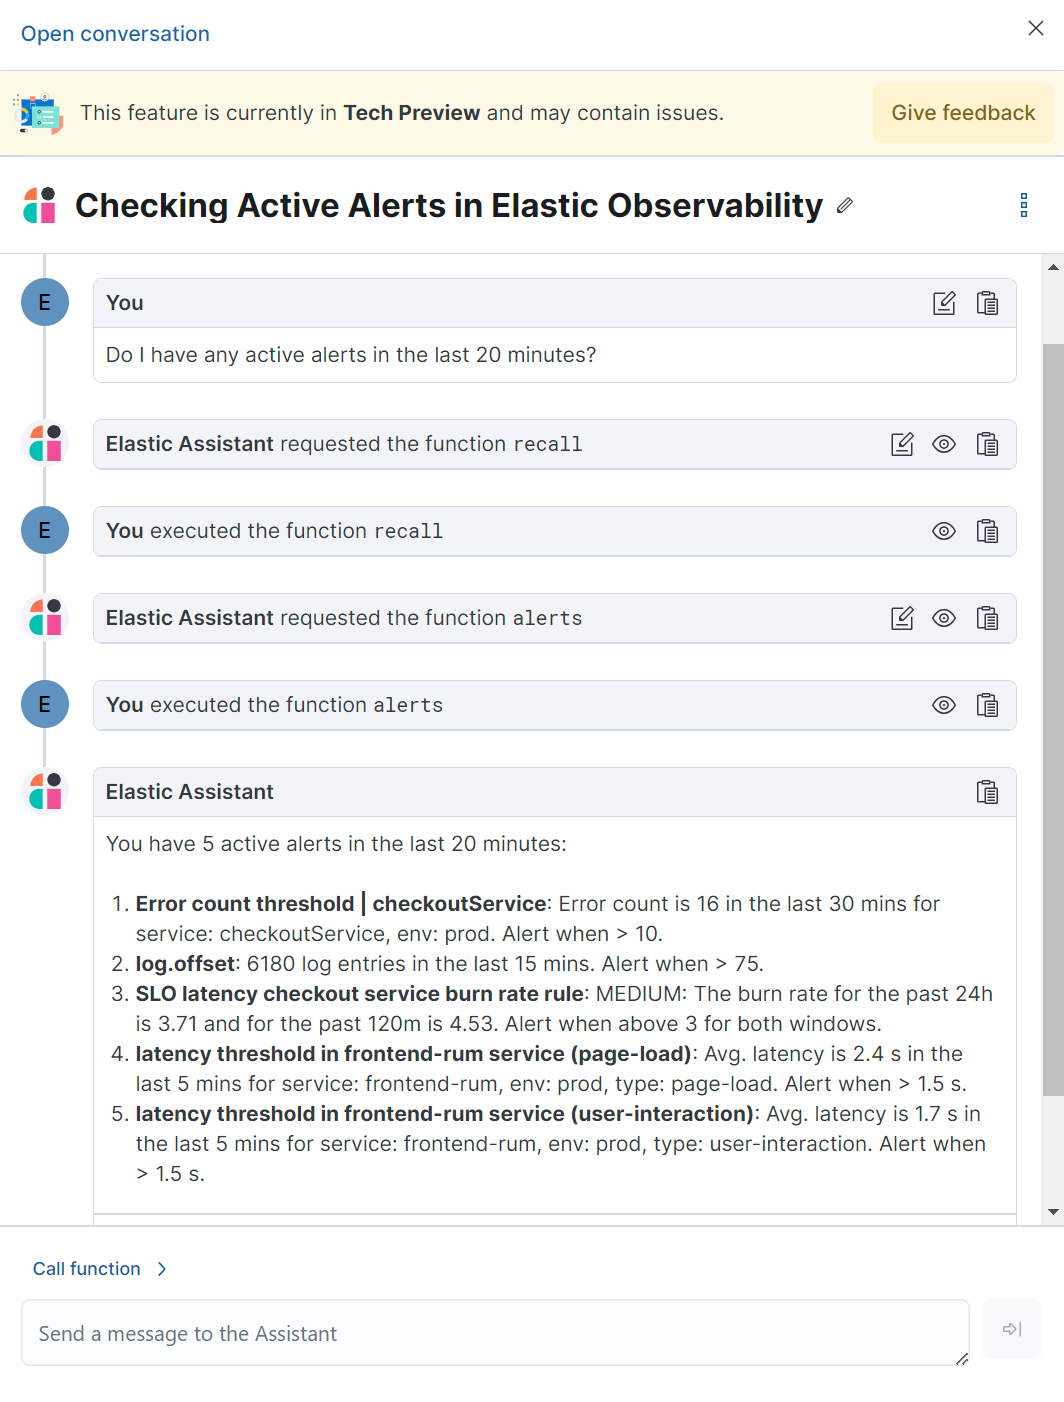 Observability AI assistant chat